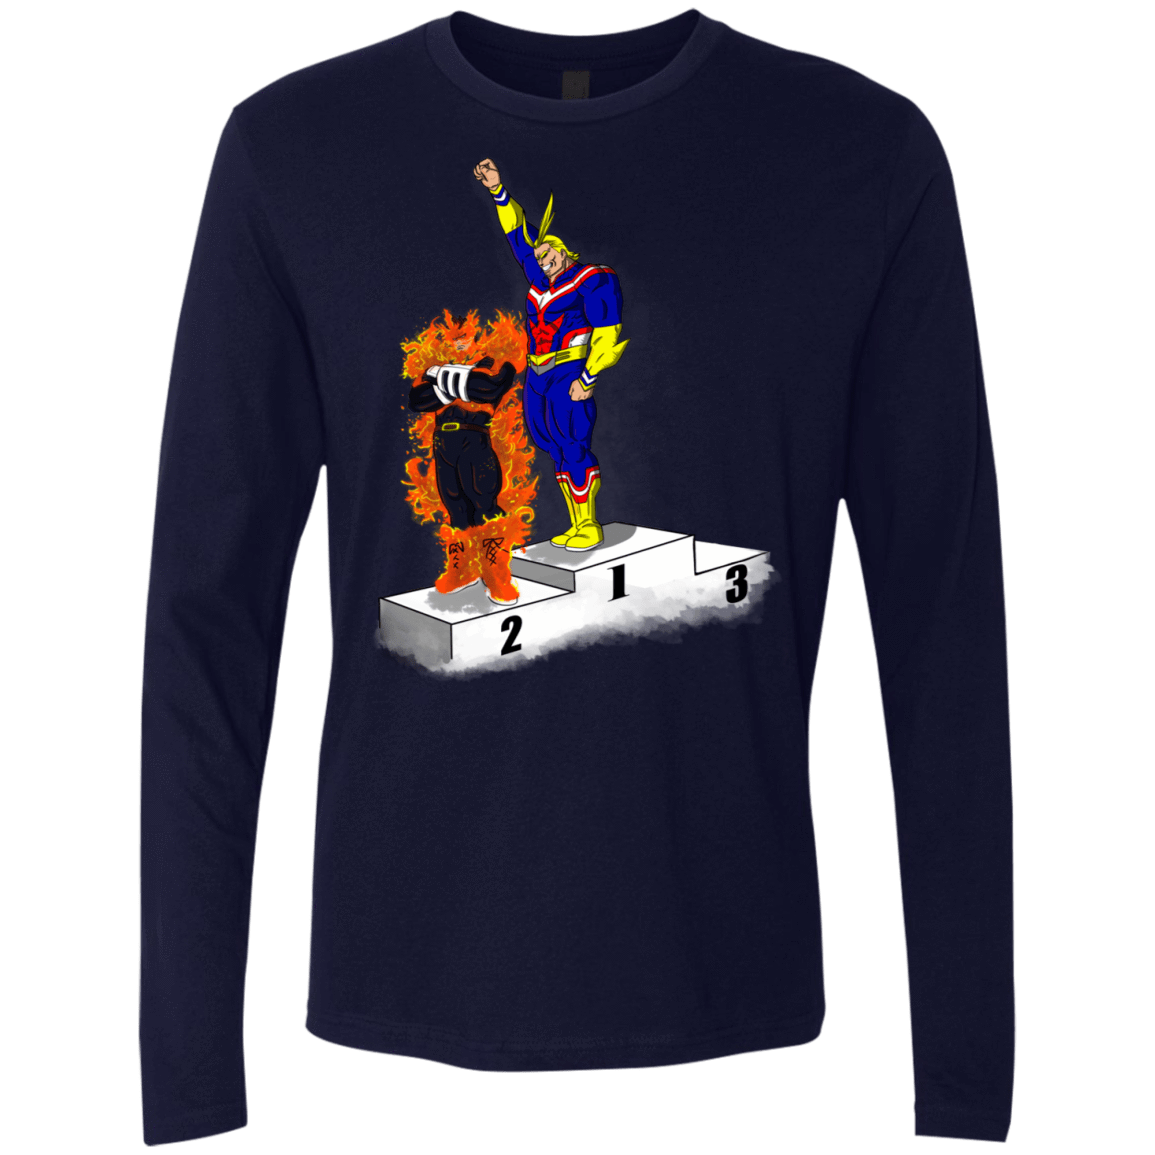 T-Shirts Midnight Navy / S Number One Men's Premium Long Sleeve